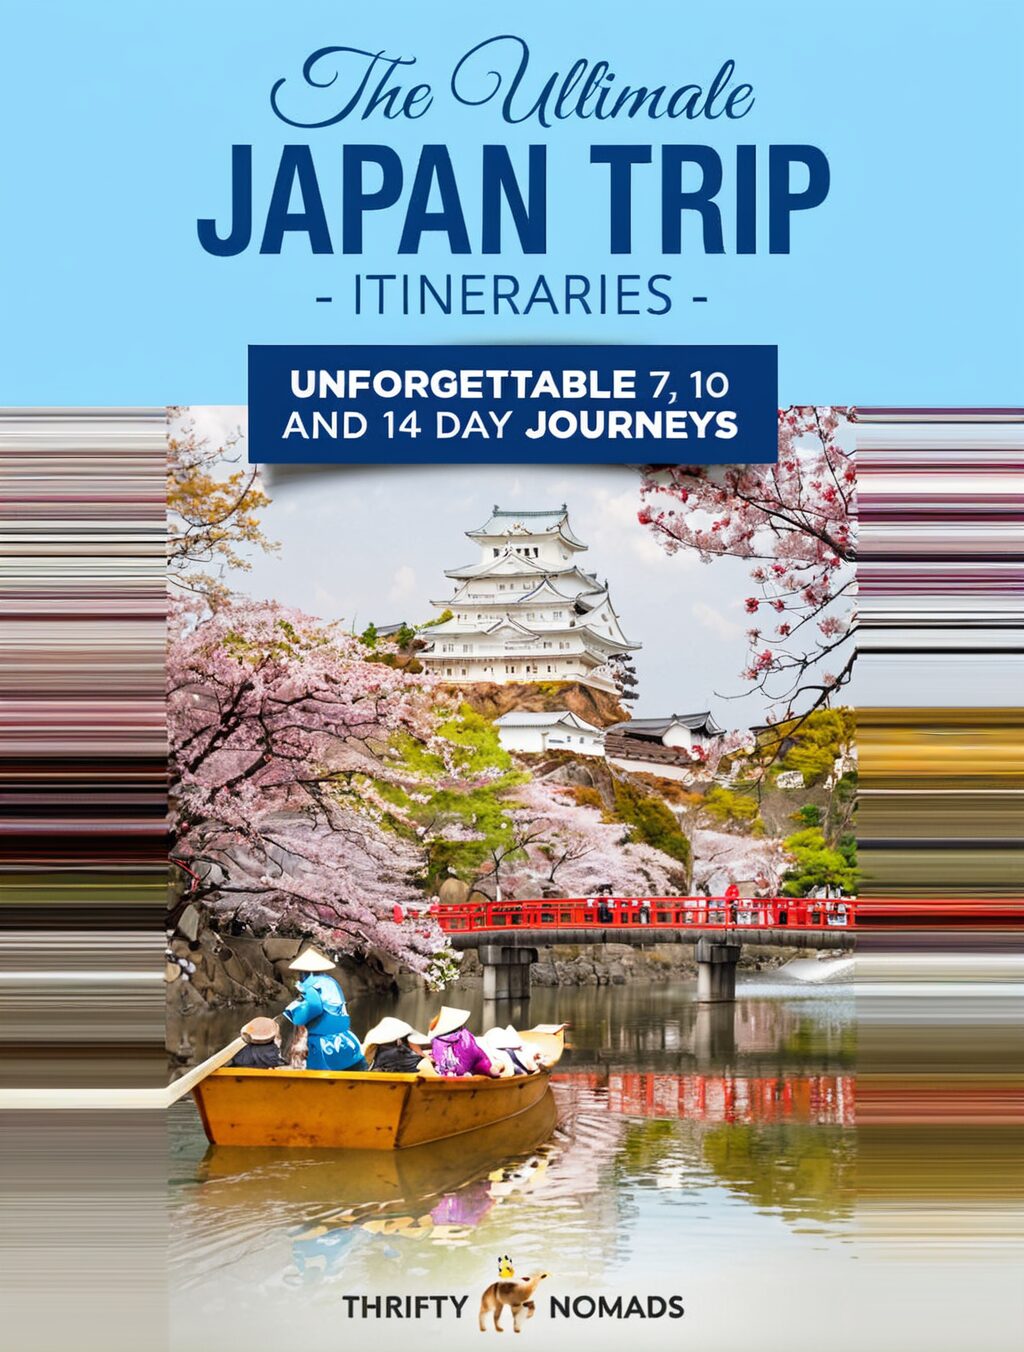 is it safe to travel to japan with kids